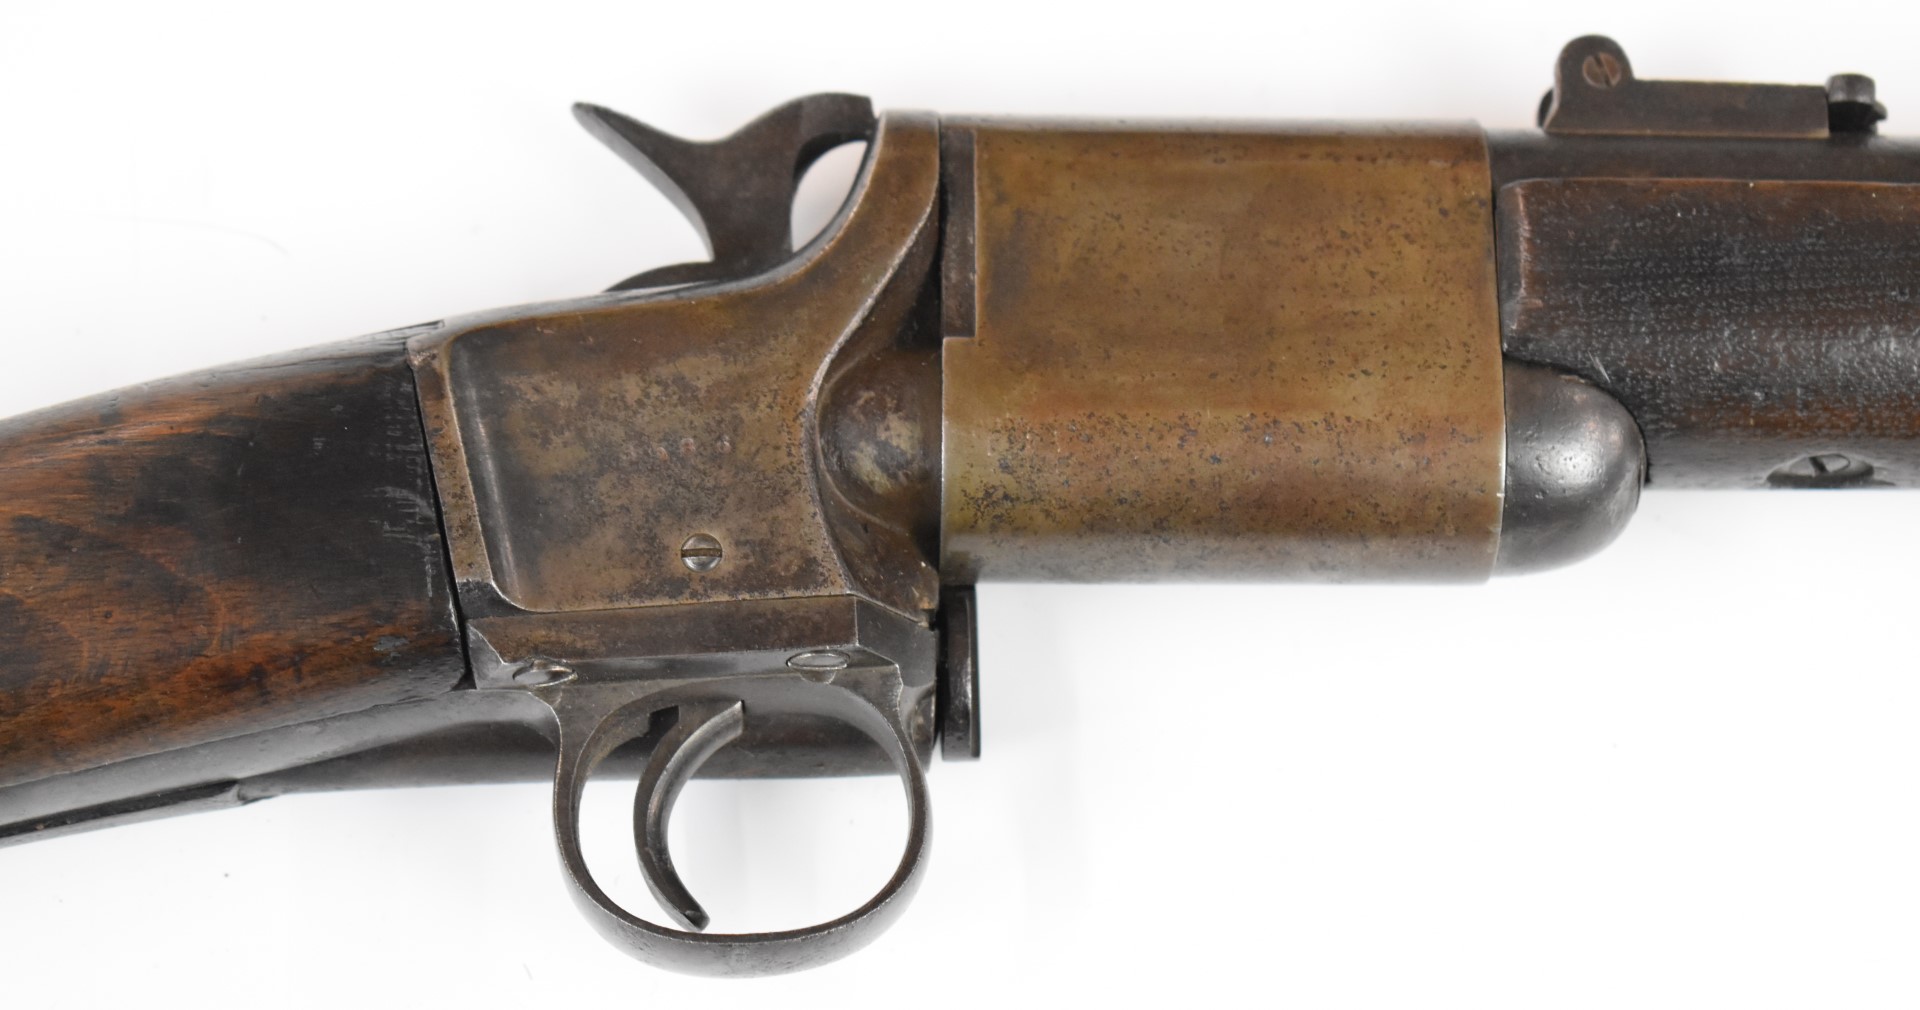 Meriden Manufacturing Co for Charles Parker of Triplett & Scott .50 twist-action repeating carbine - Image 5 of 7